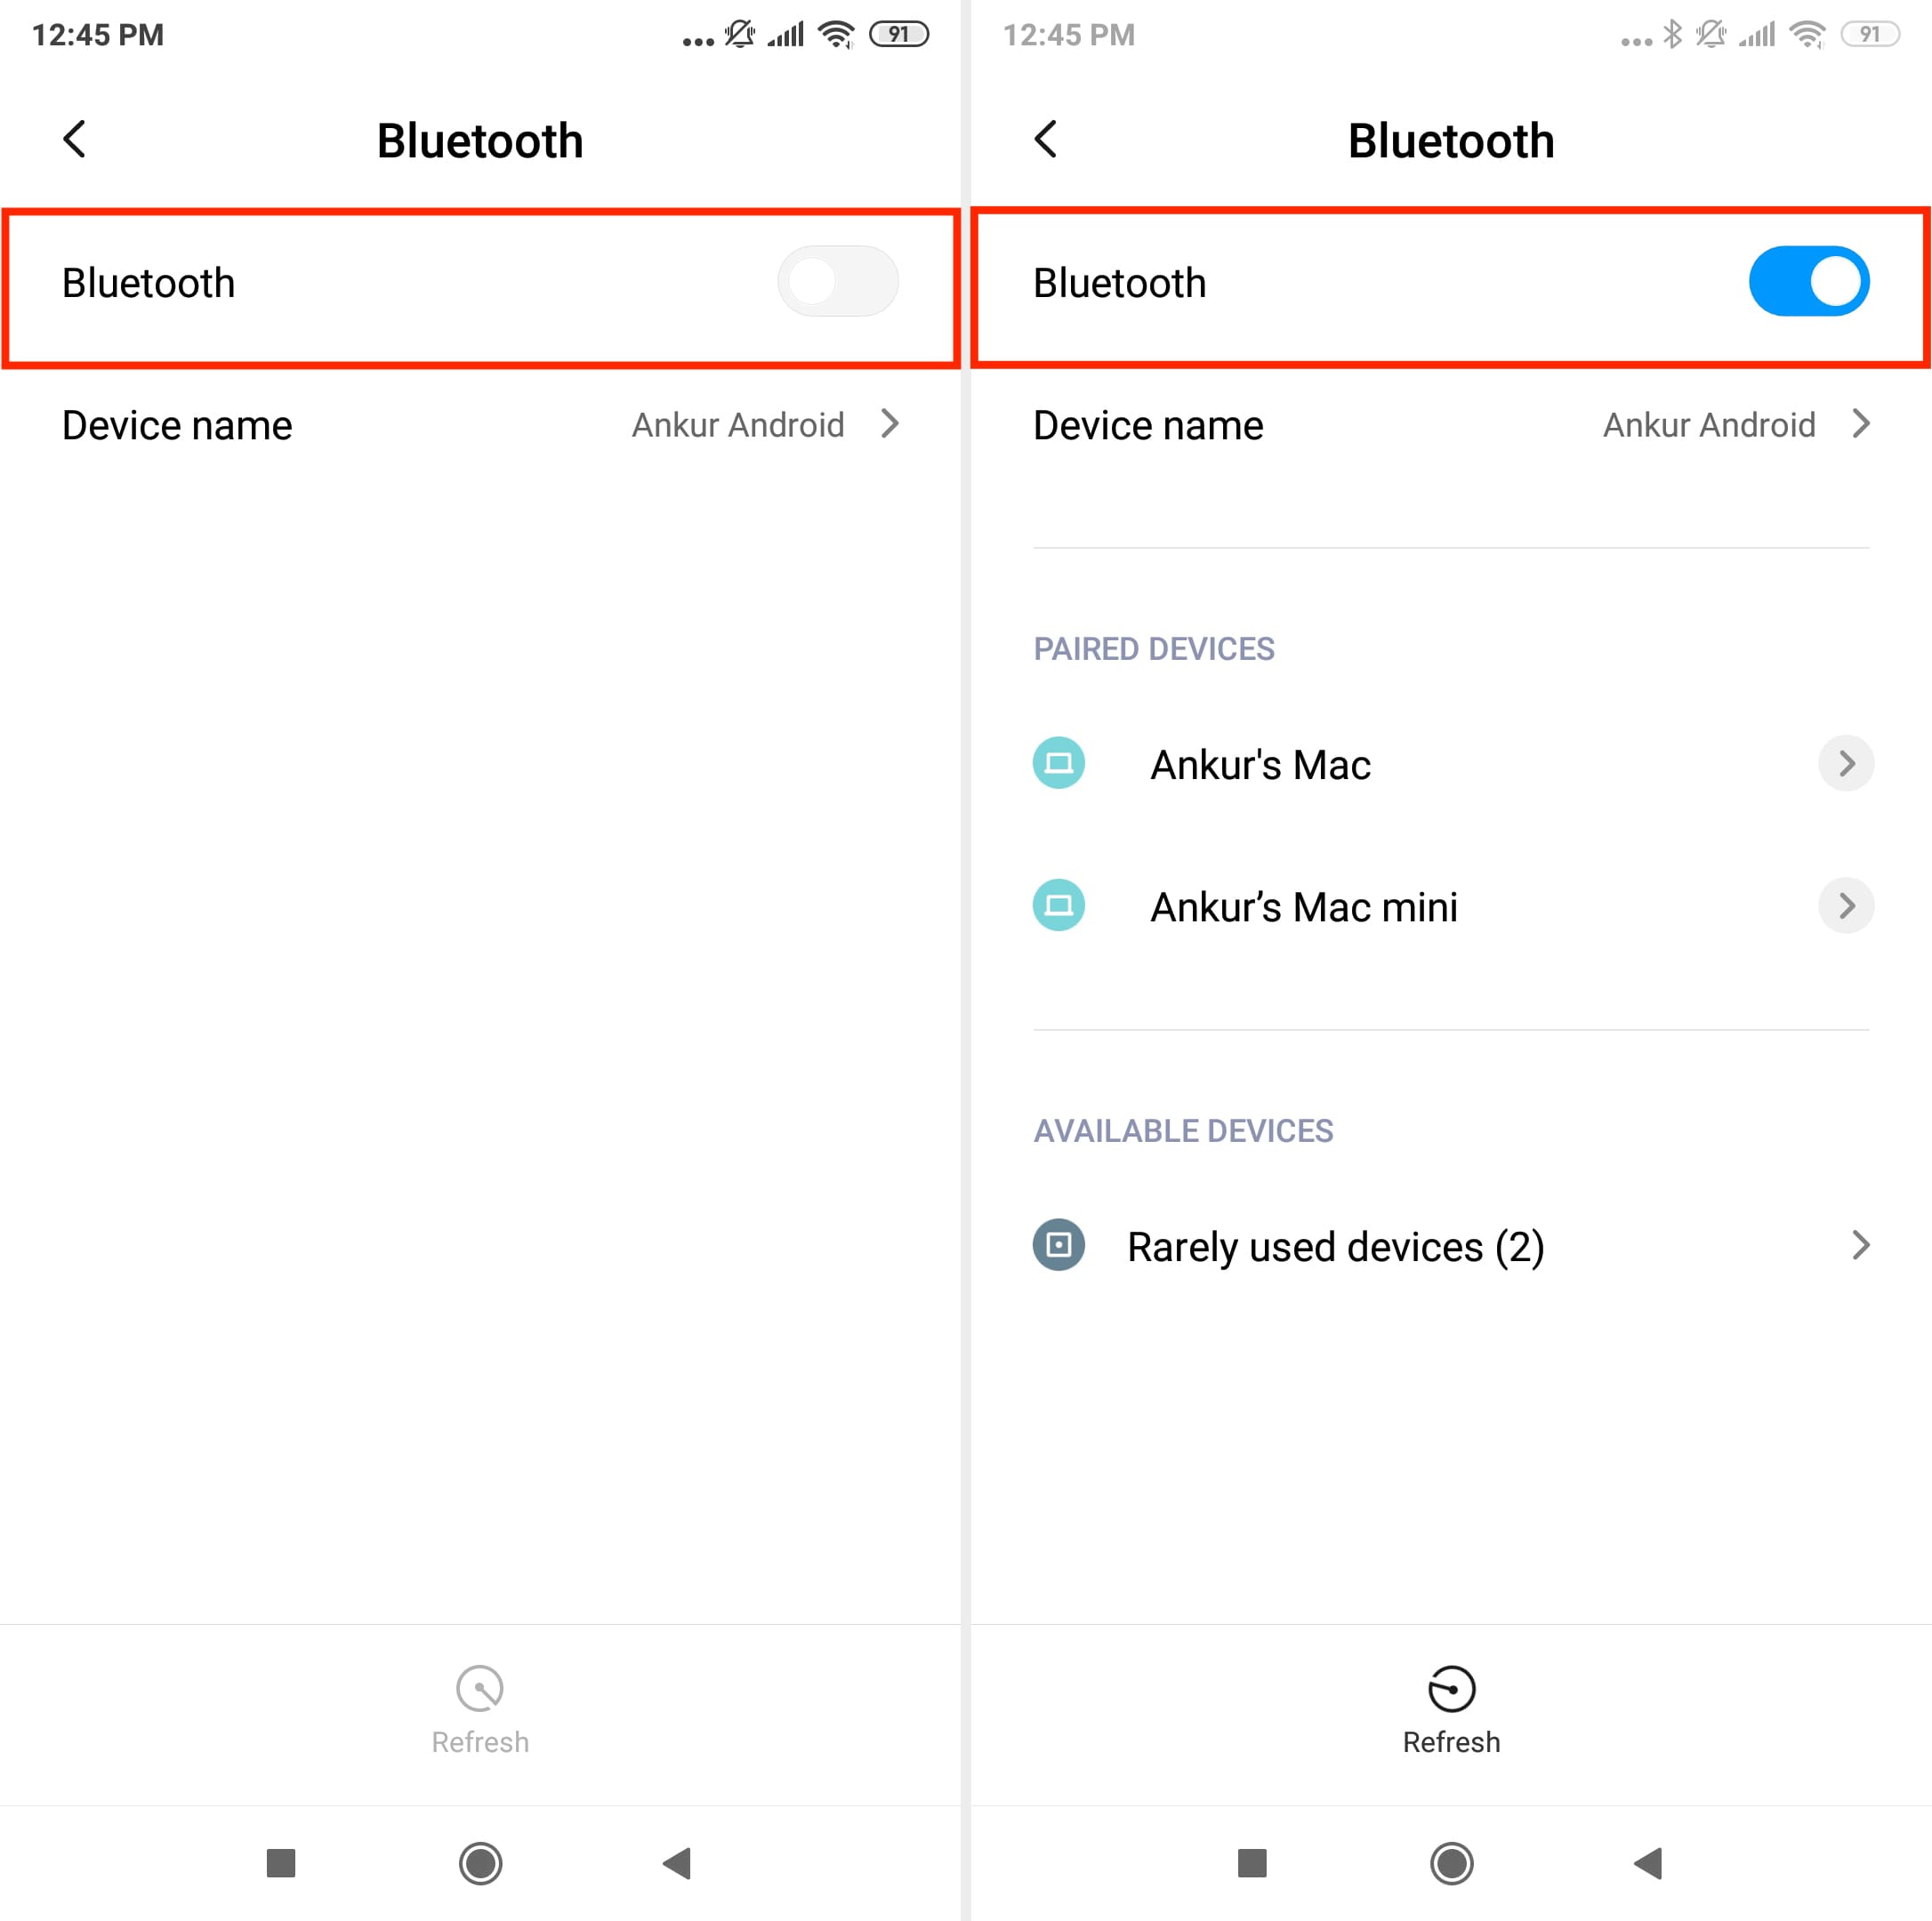 Disable and enable Bluetooth on Android phone